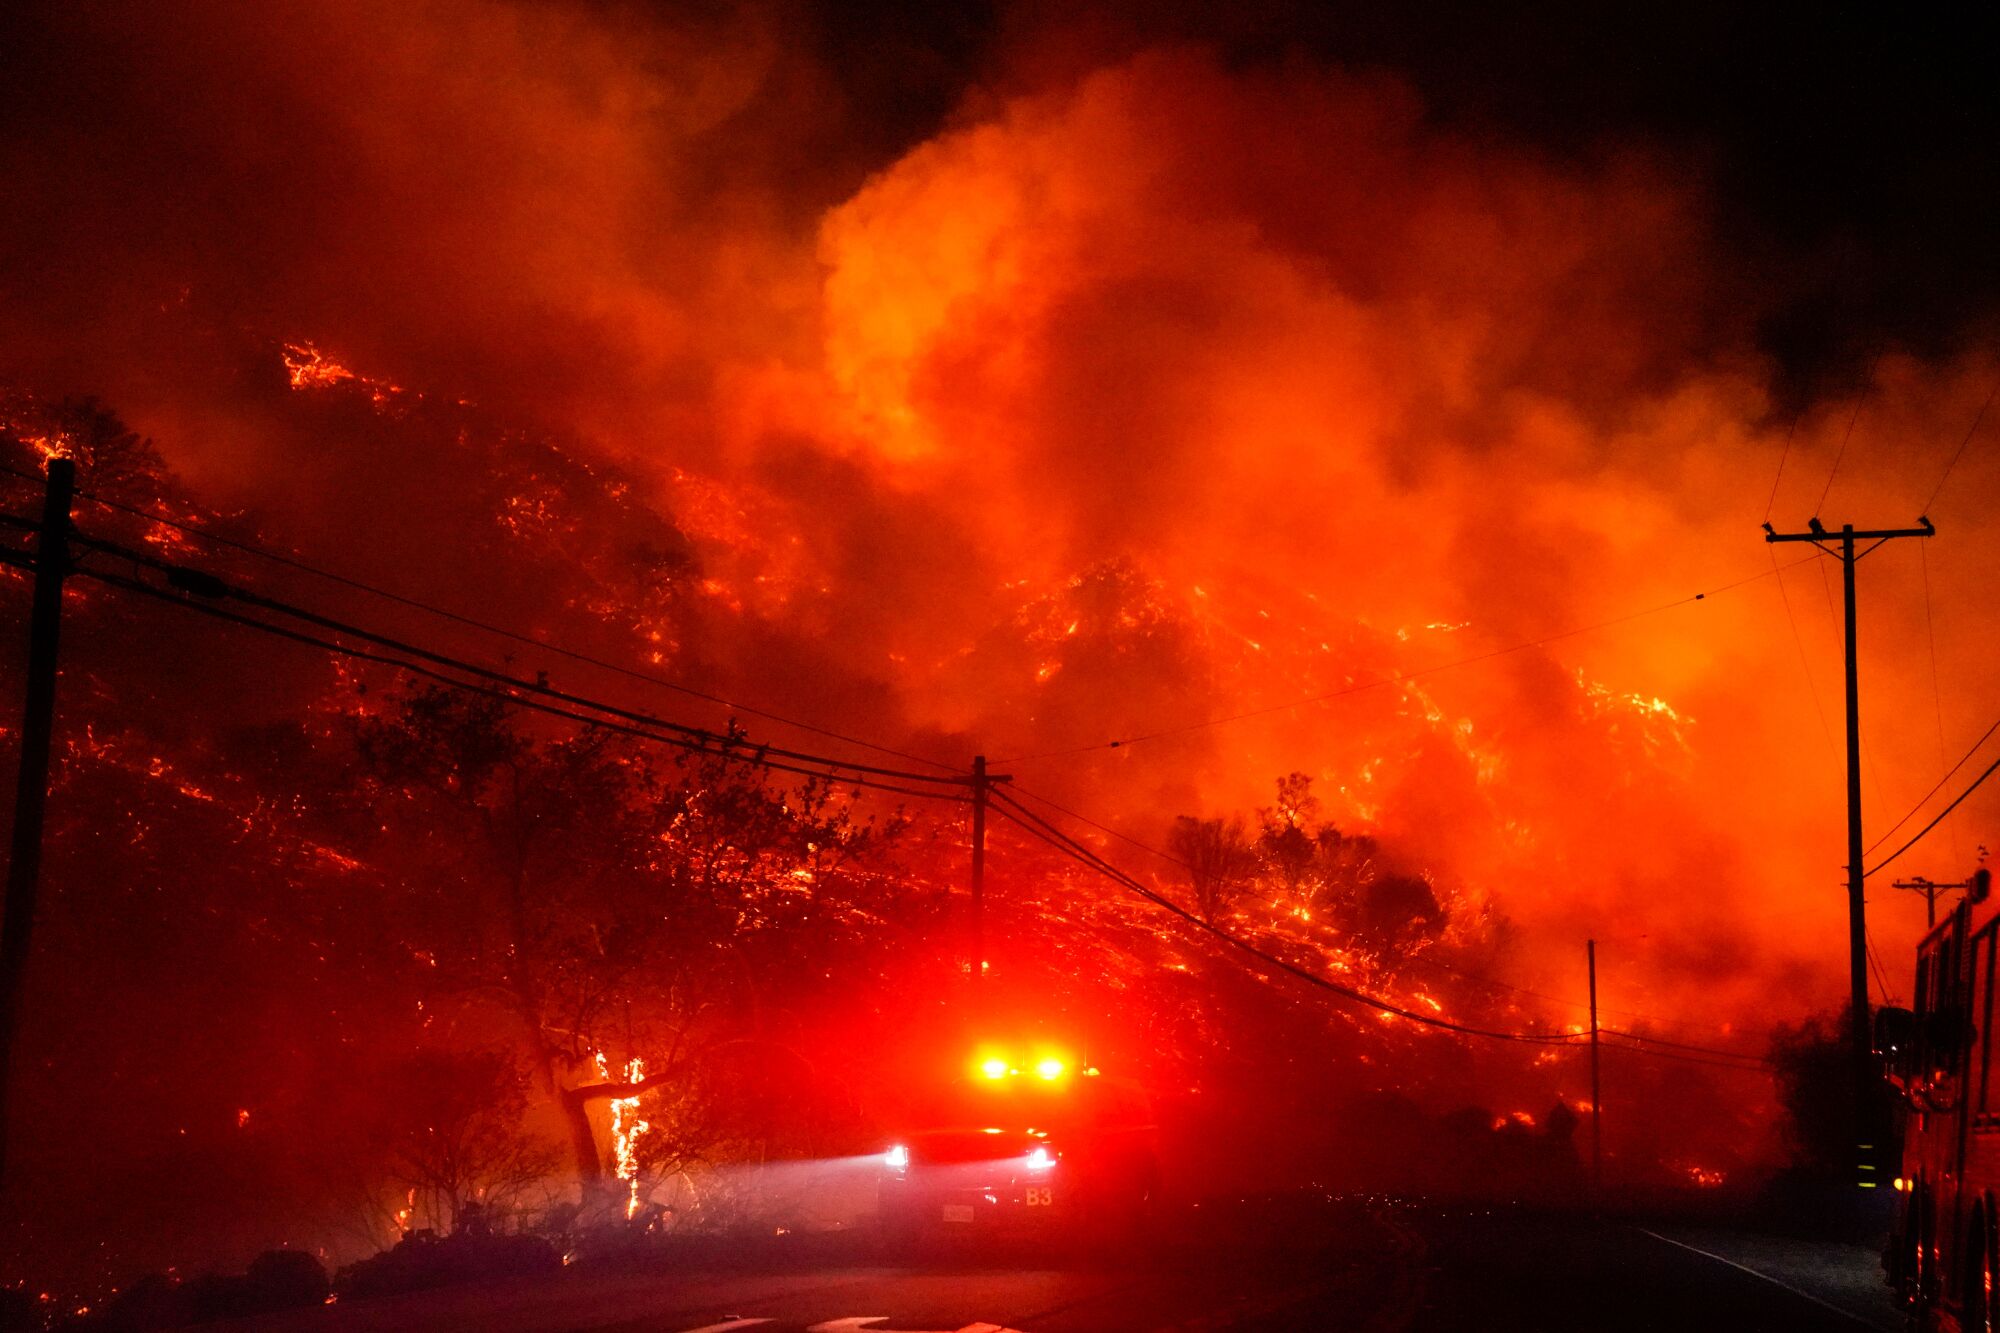 A fire truck's lights shine as it drives on a road at night with orange flames and embers on a hillside